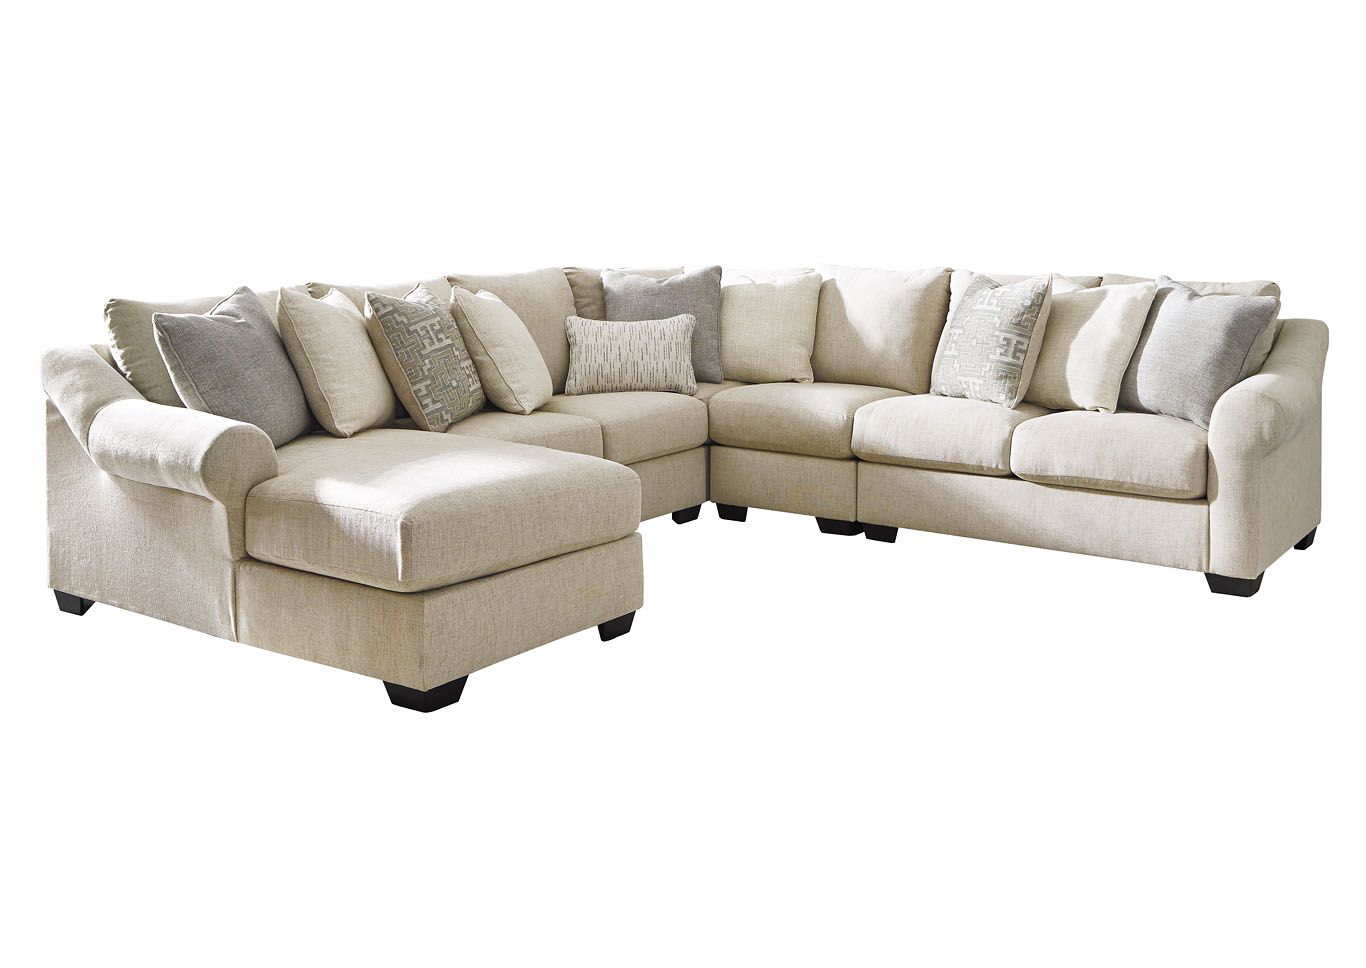 Carnaby 5 Piece Sectional Chaise Ashley Furniture Pertaining To Setoril Modern Sectional Sofa Swith Chaise Woven Linen (View 4 of 15)